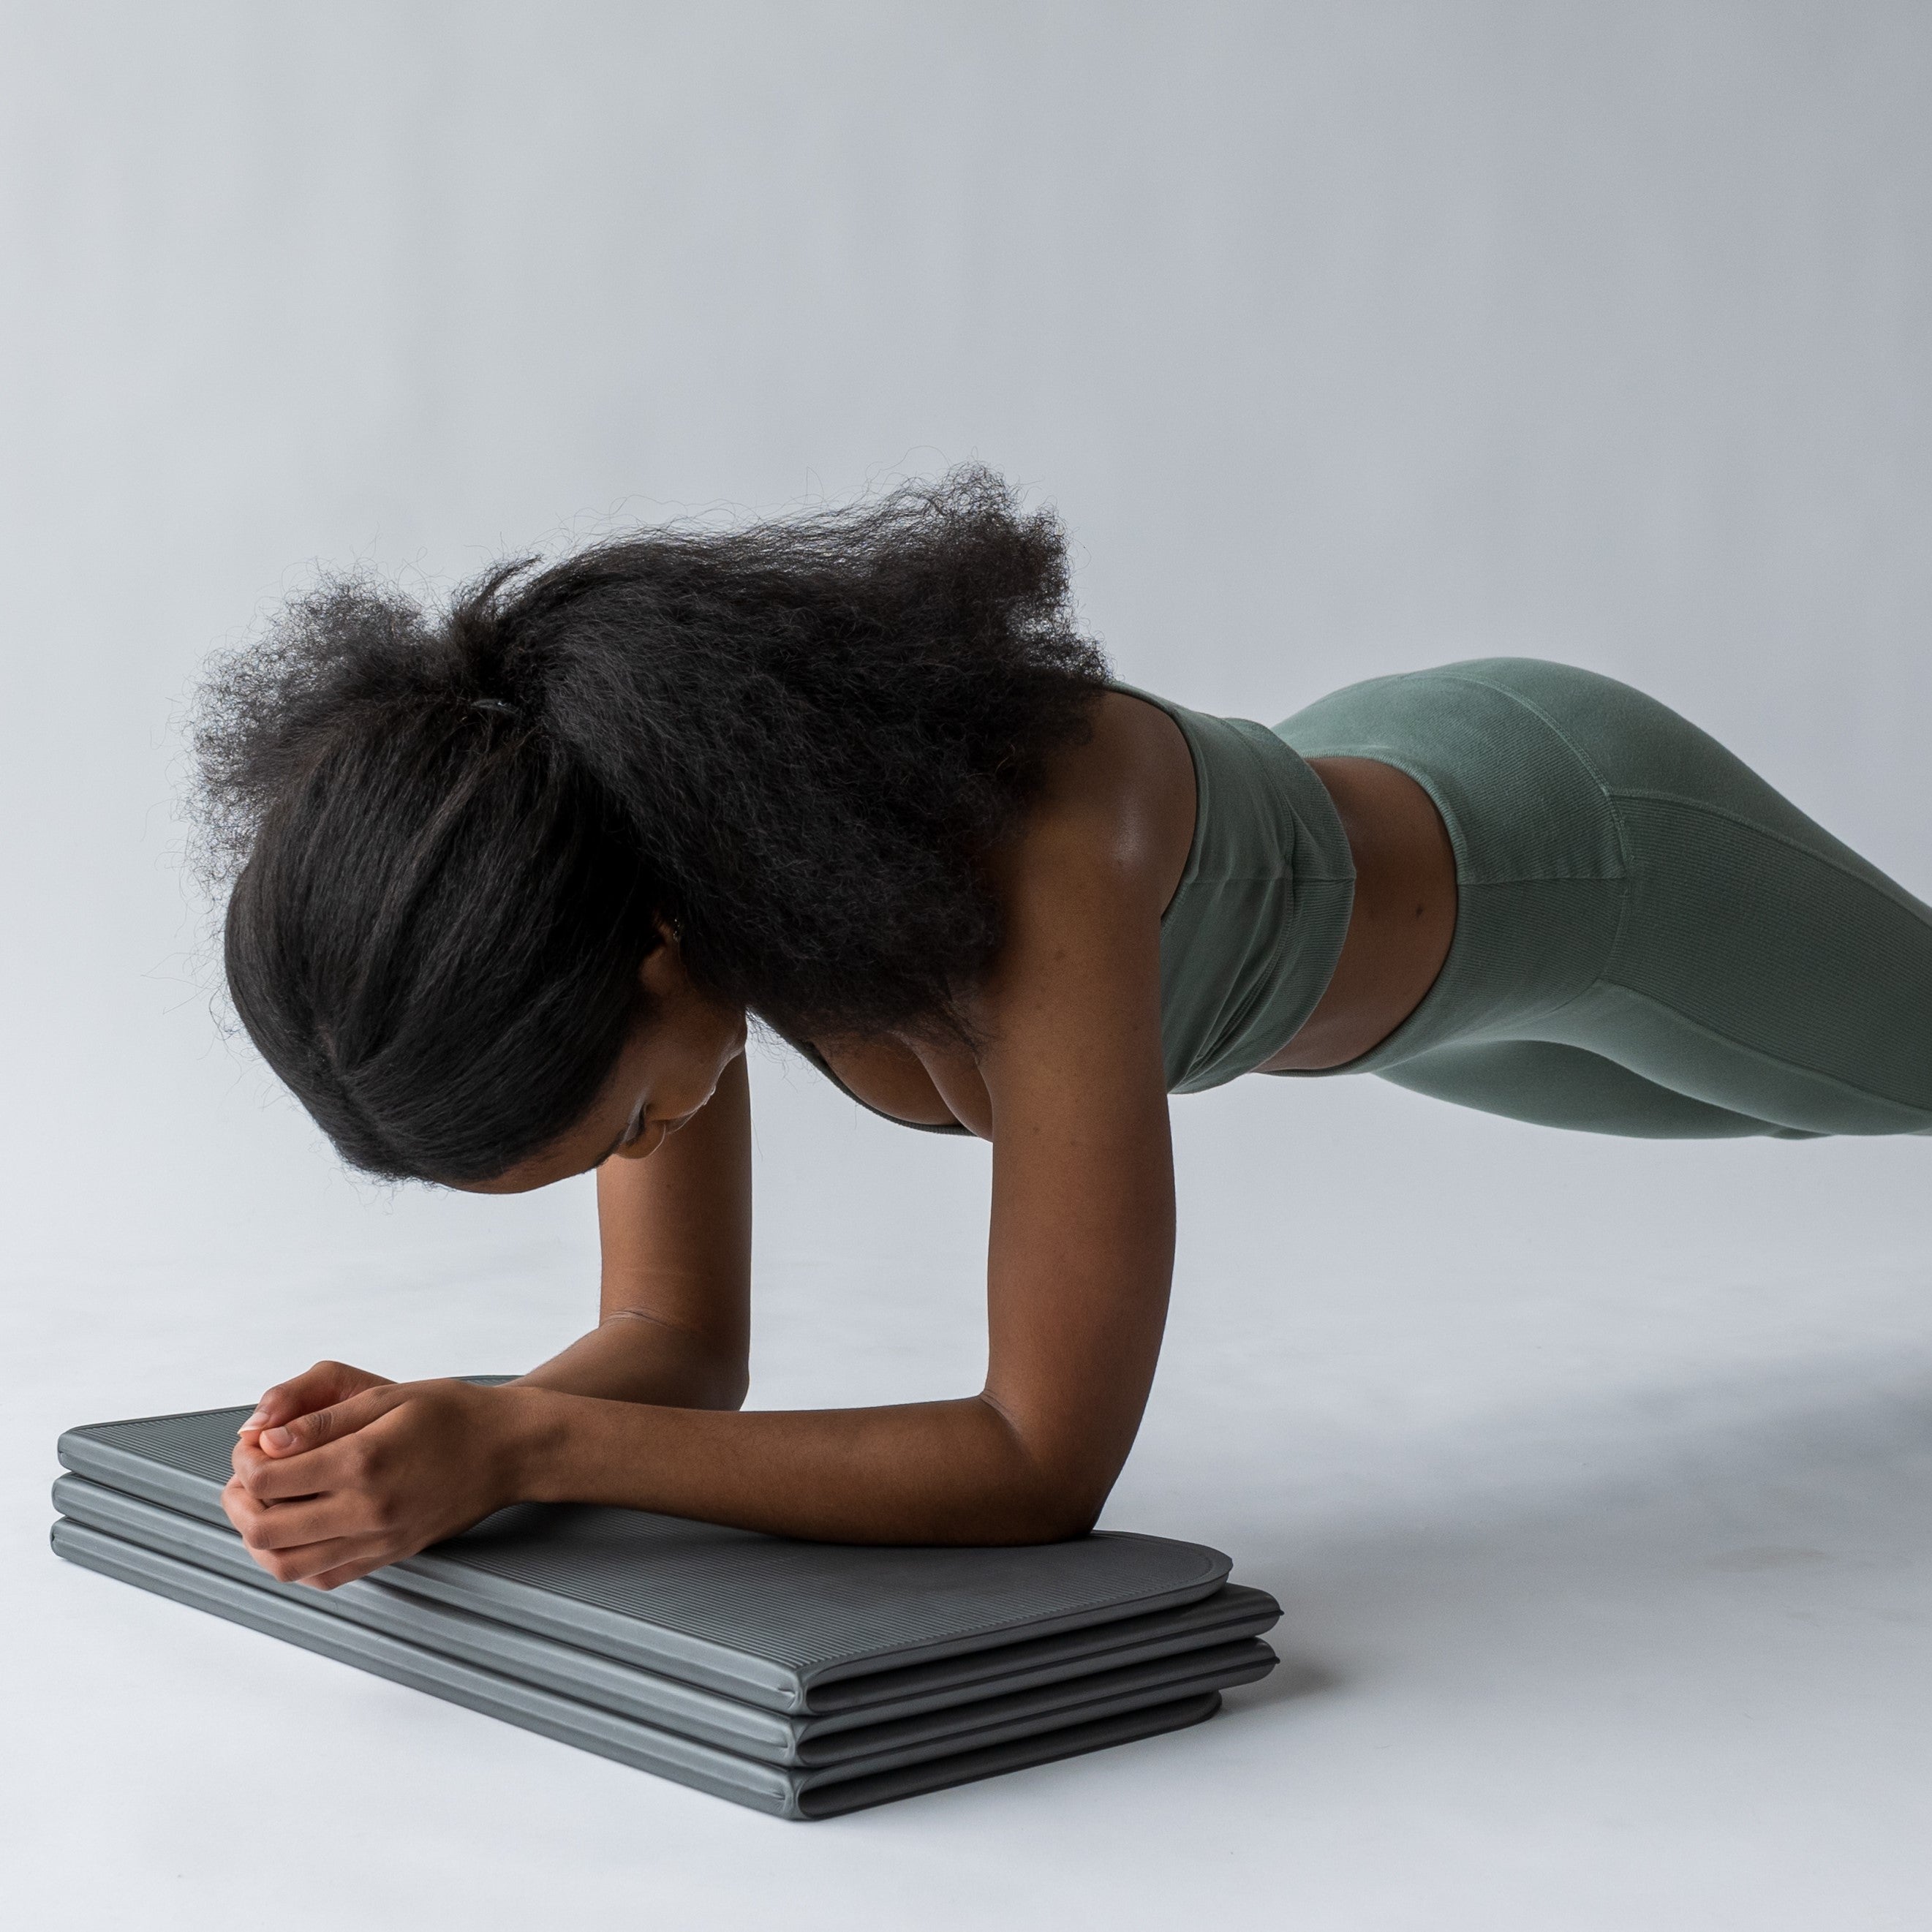 STAKT foldable yoga mat using as a block to in plank position